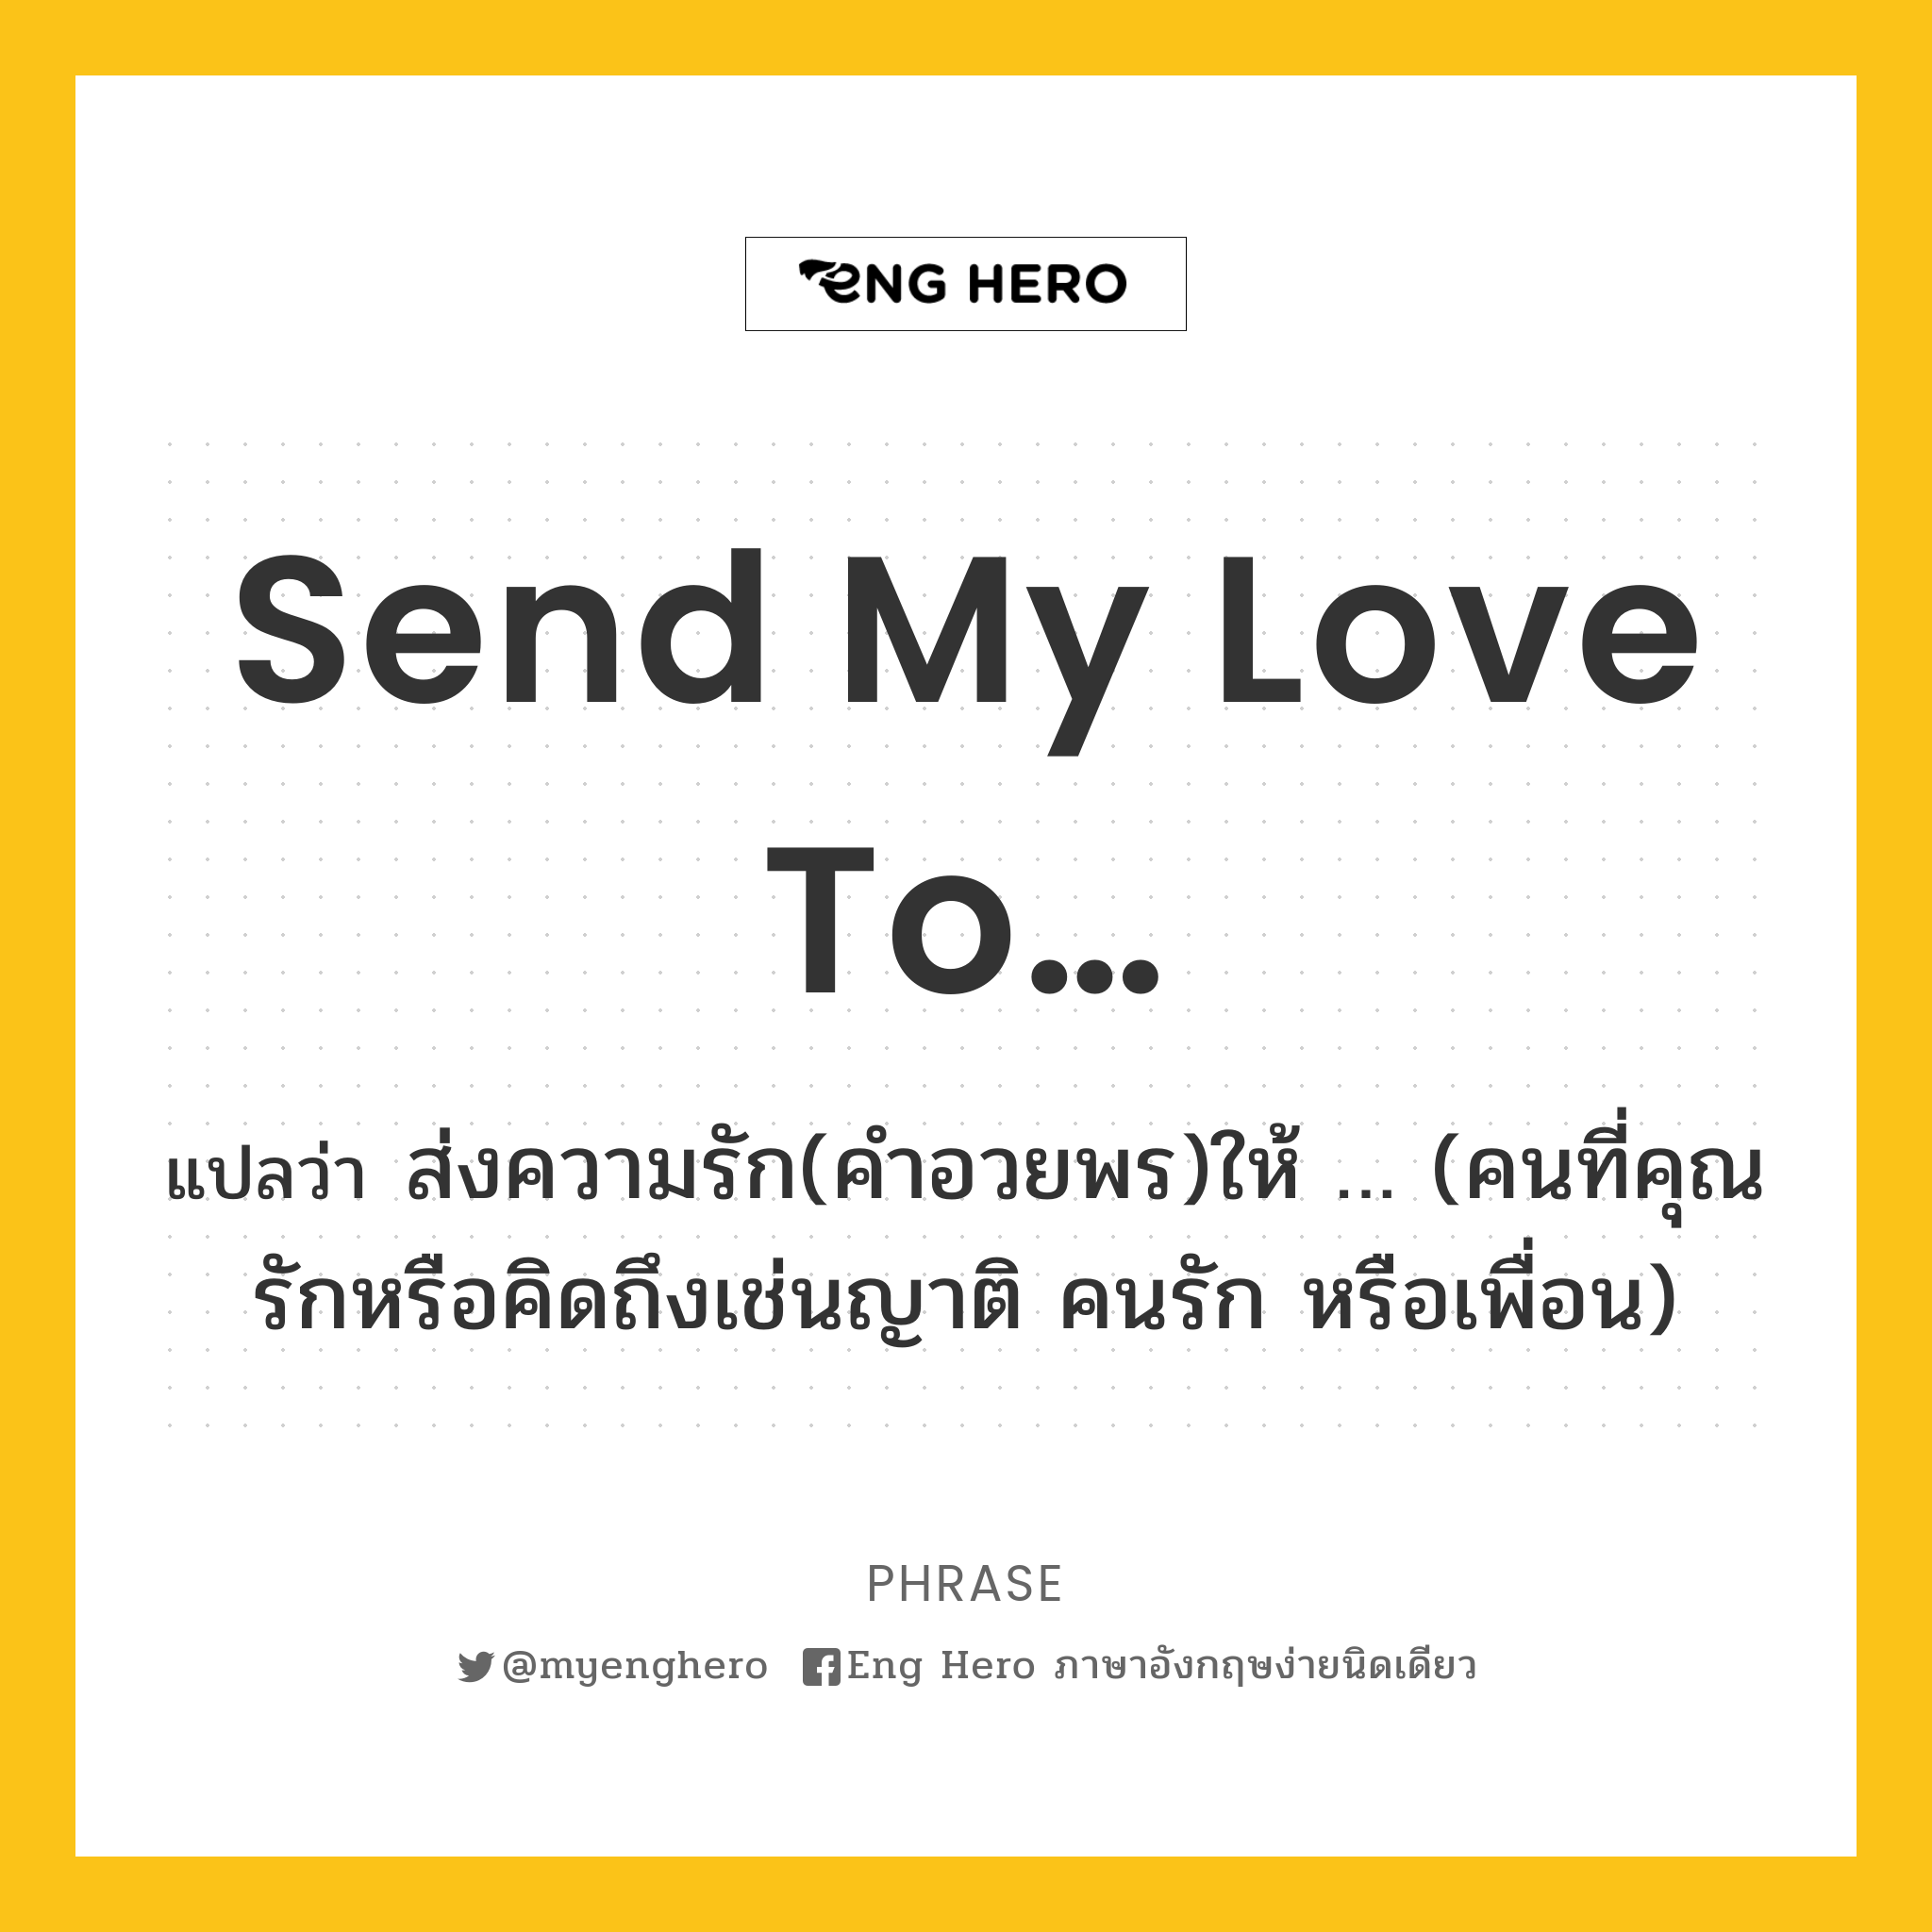 Send my love to…